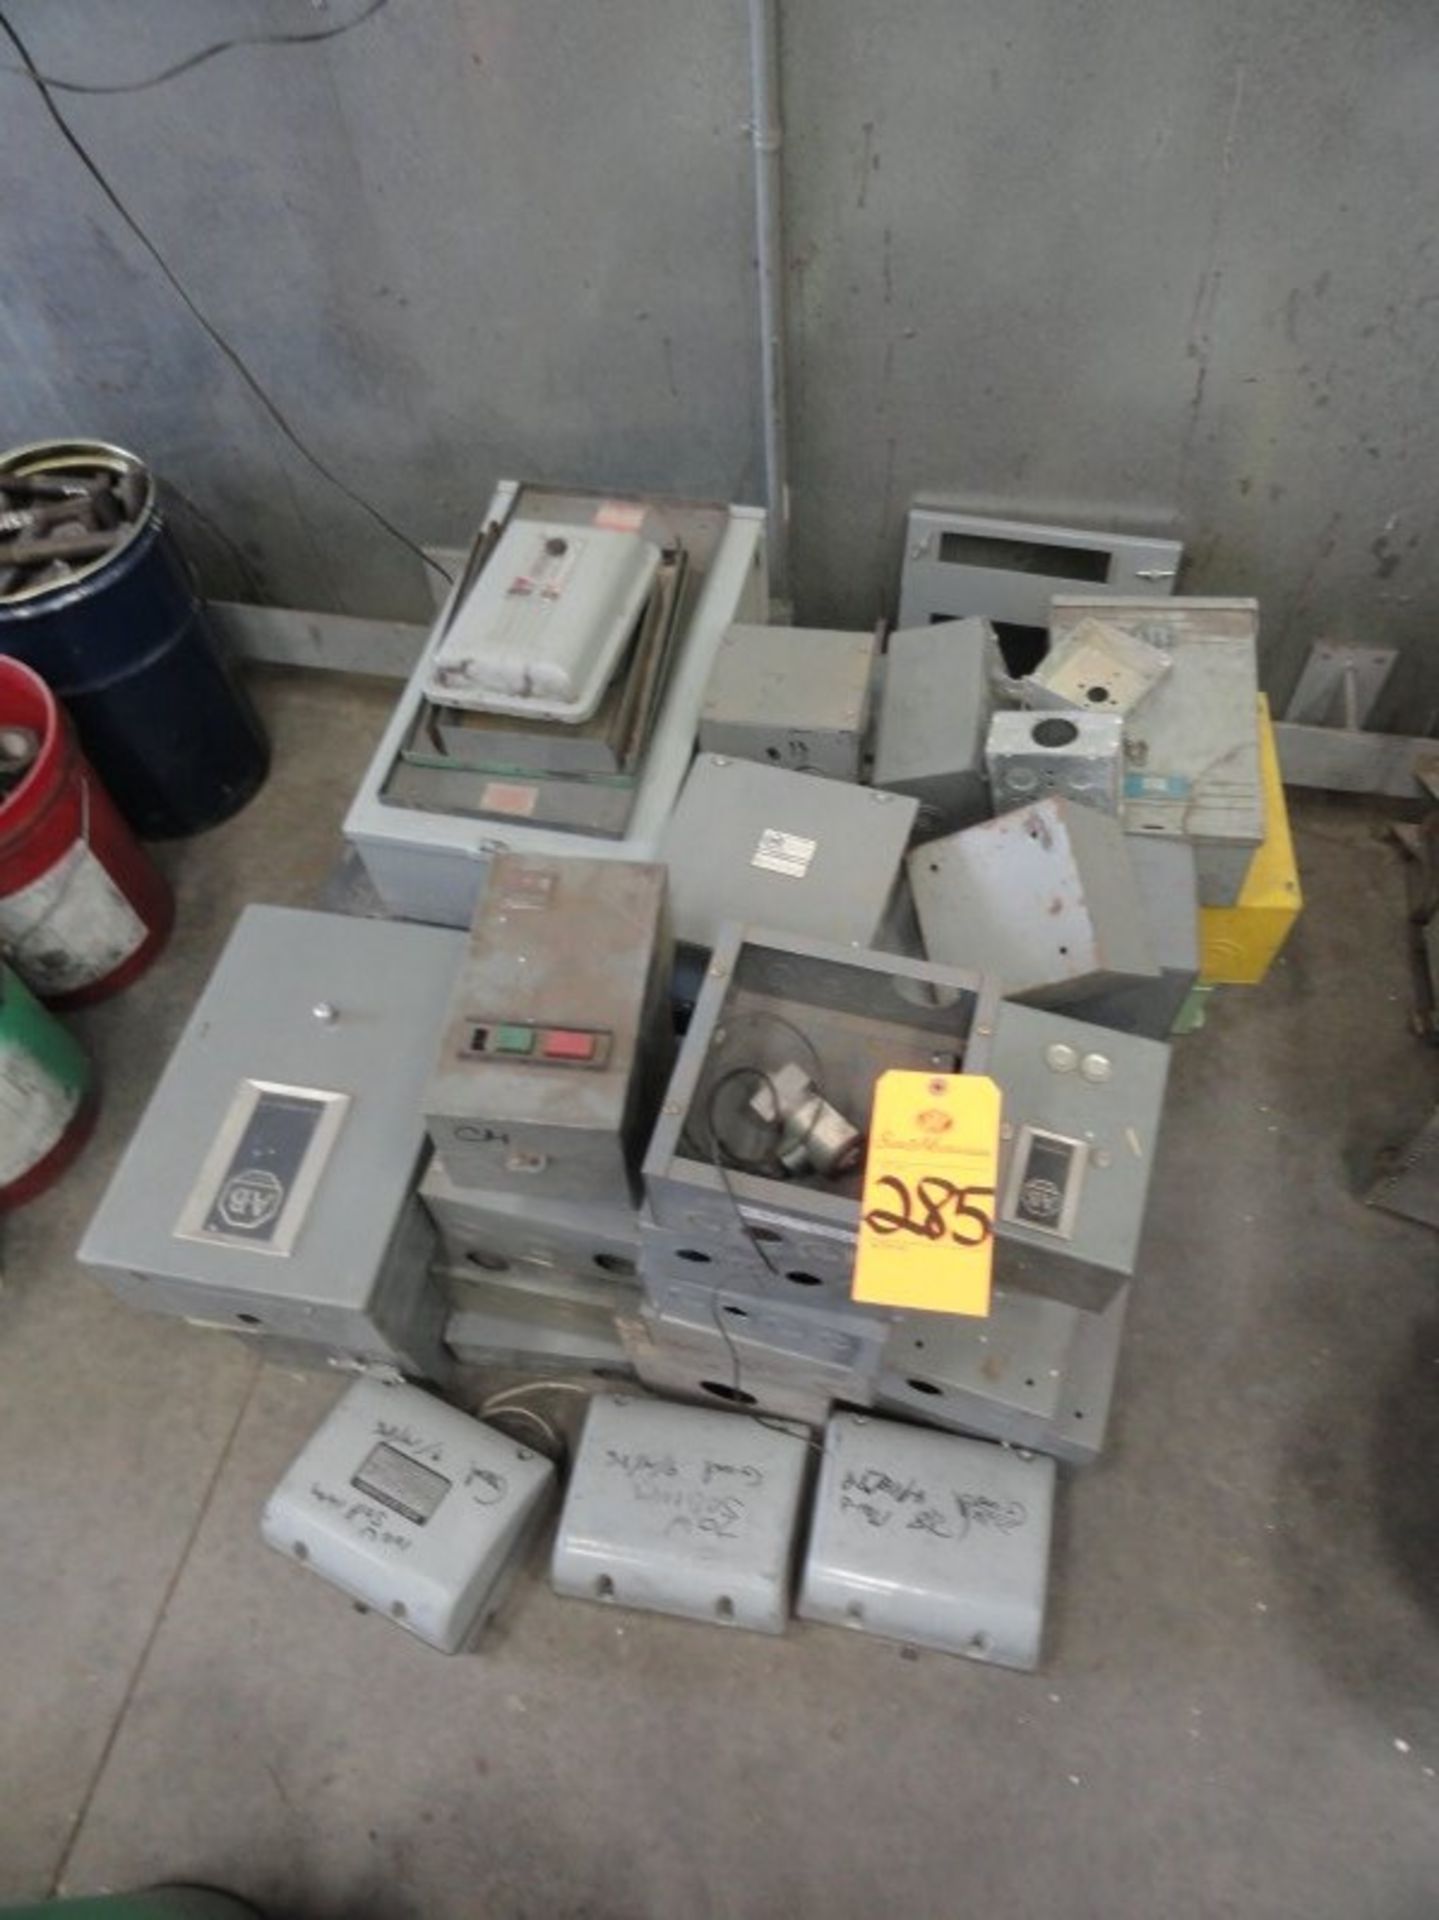 Assorted electrical boxes